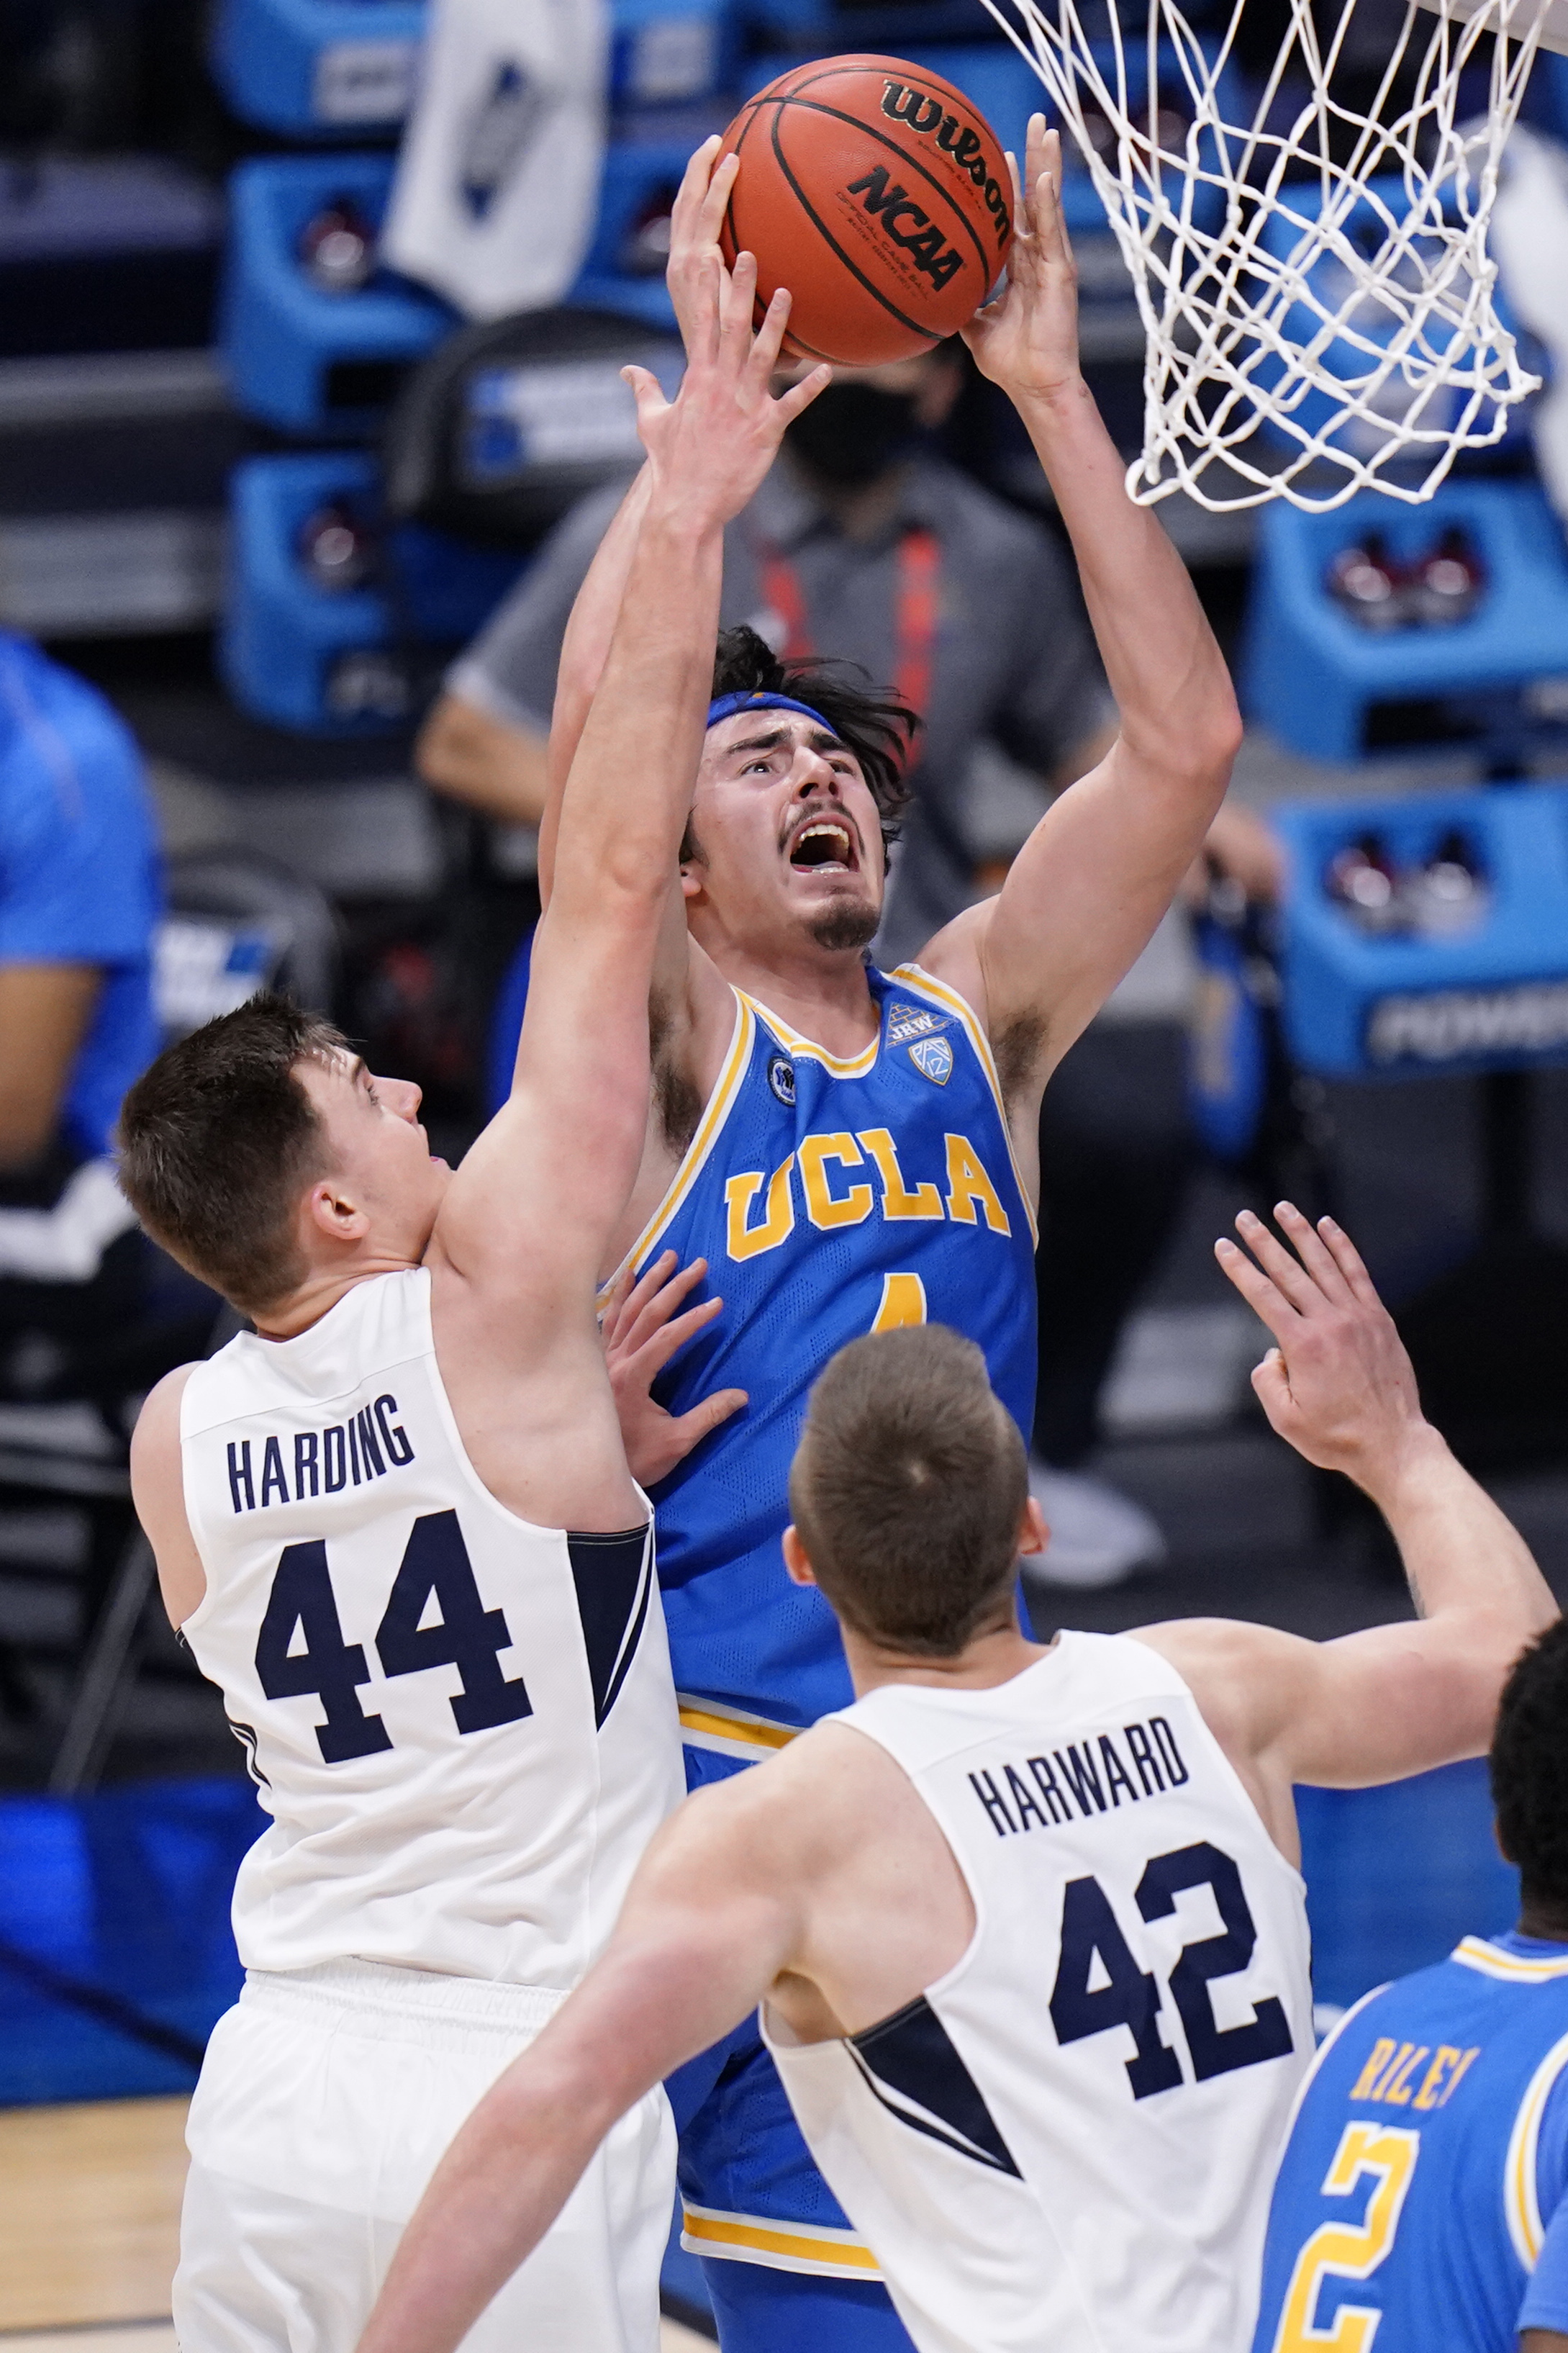 Juzang carries No. 11 UCLA past sixth-seeded BYU, 73-62